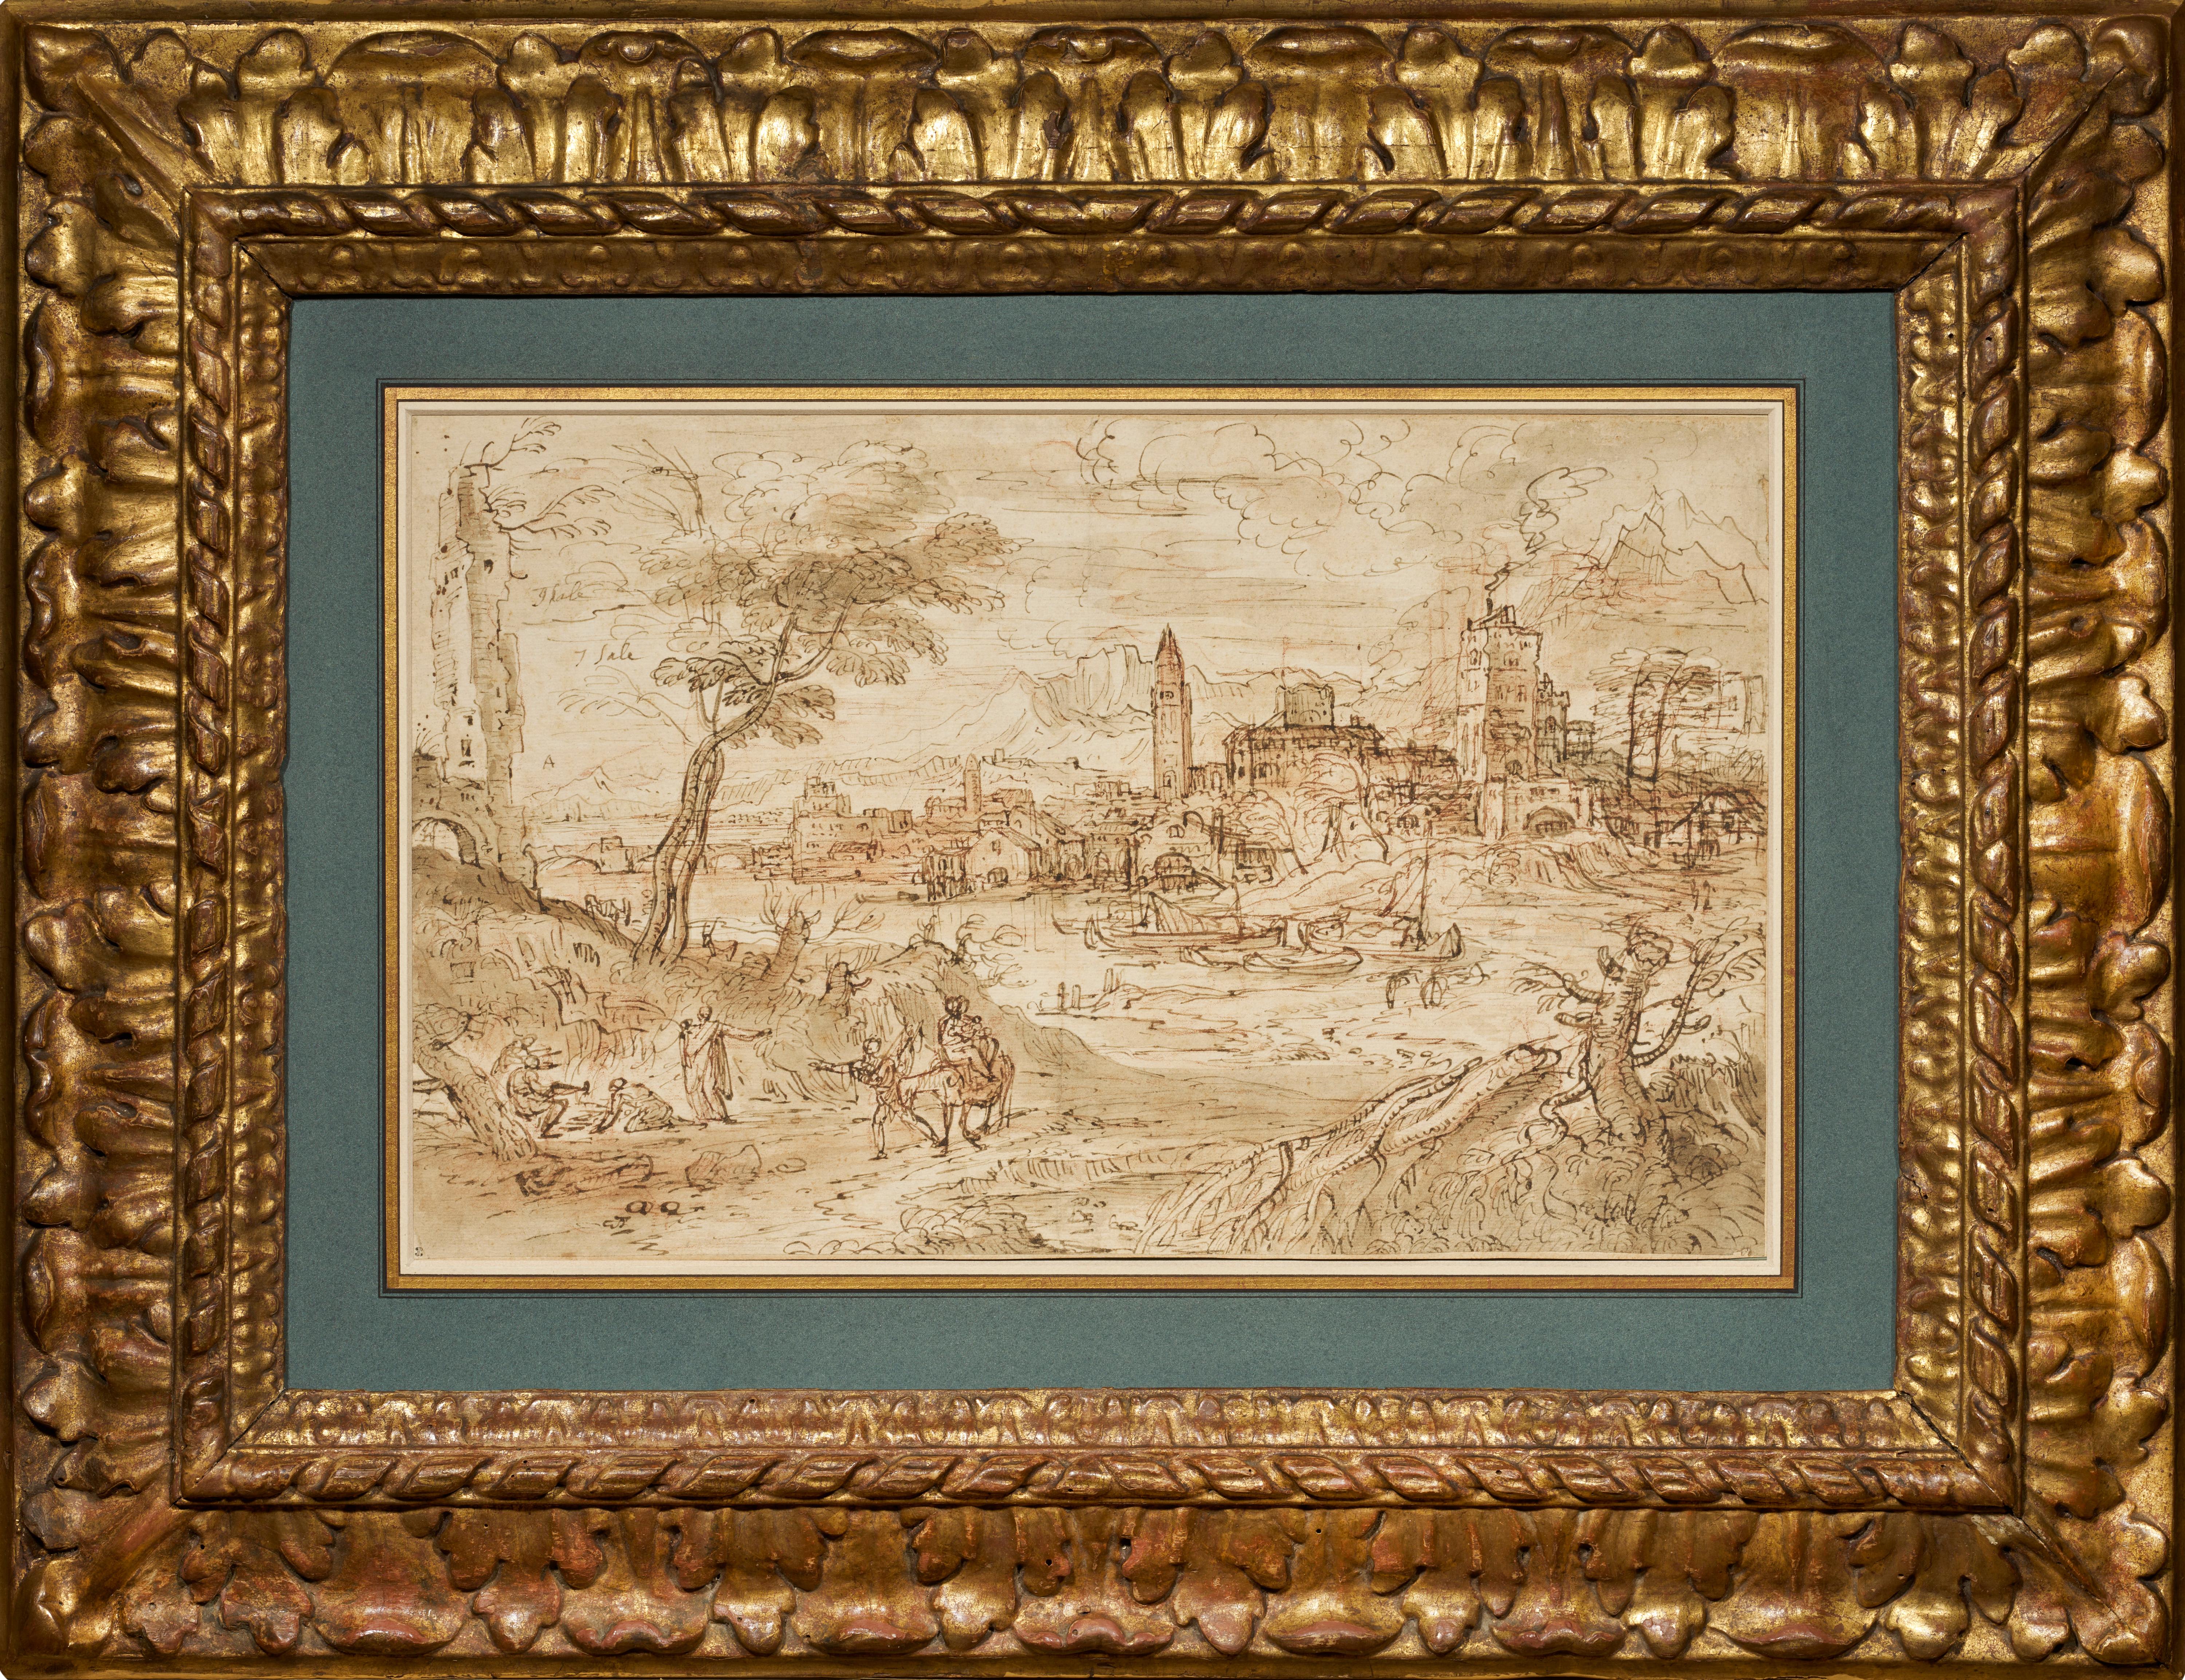 A large landscape drawing executed in Italy around 1630 by a Flemish artist 2